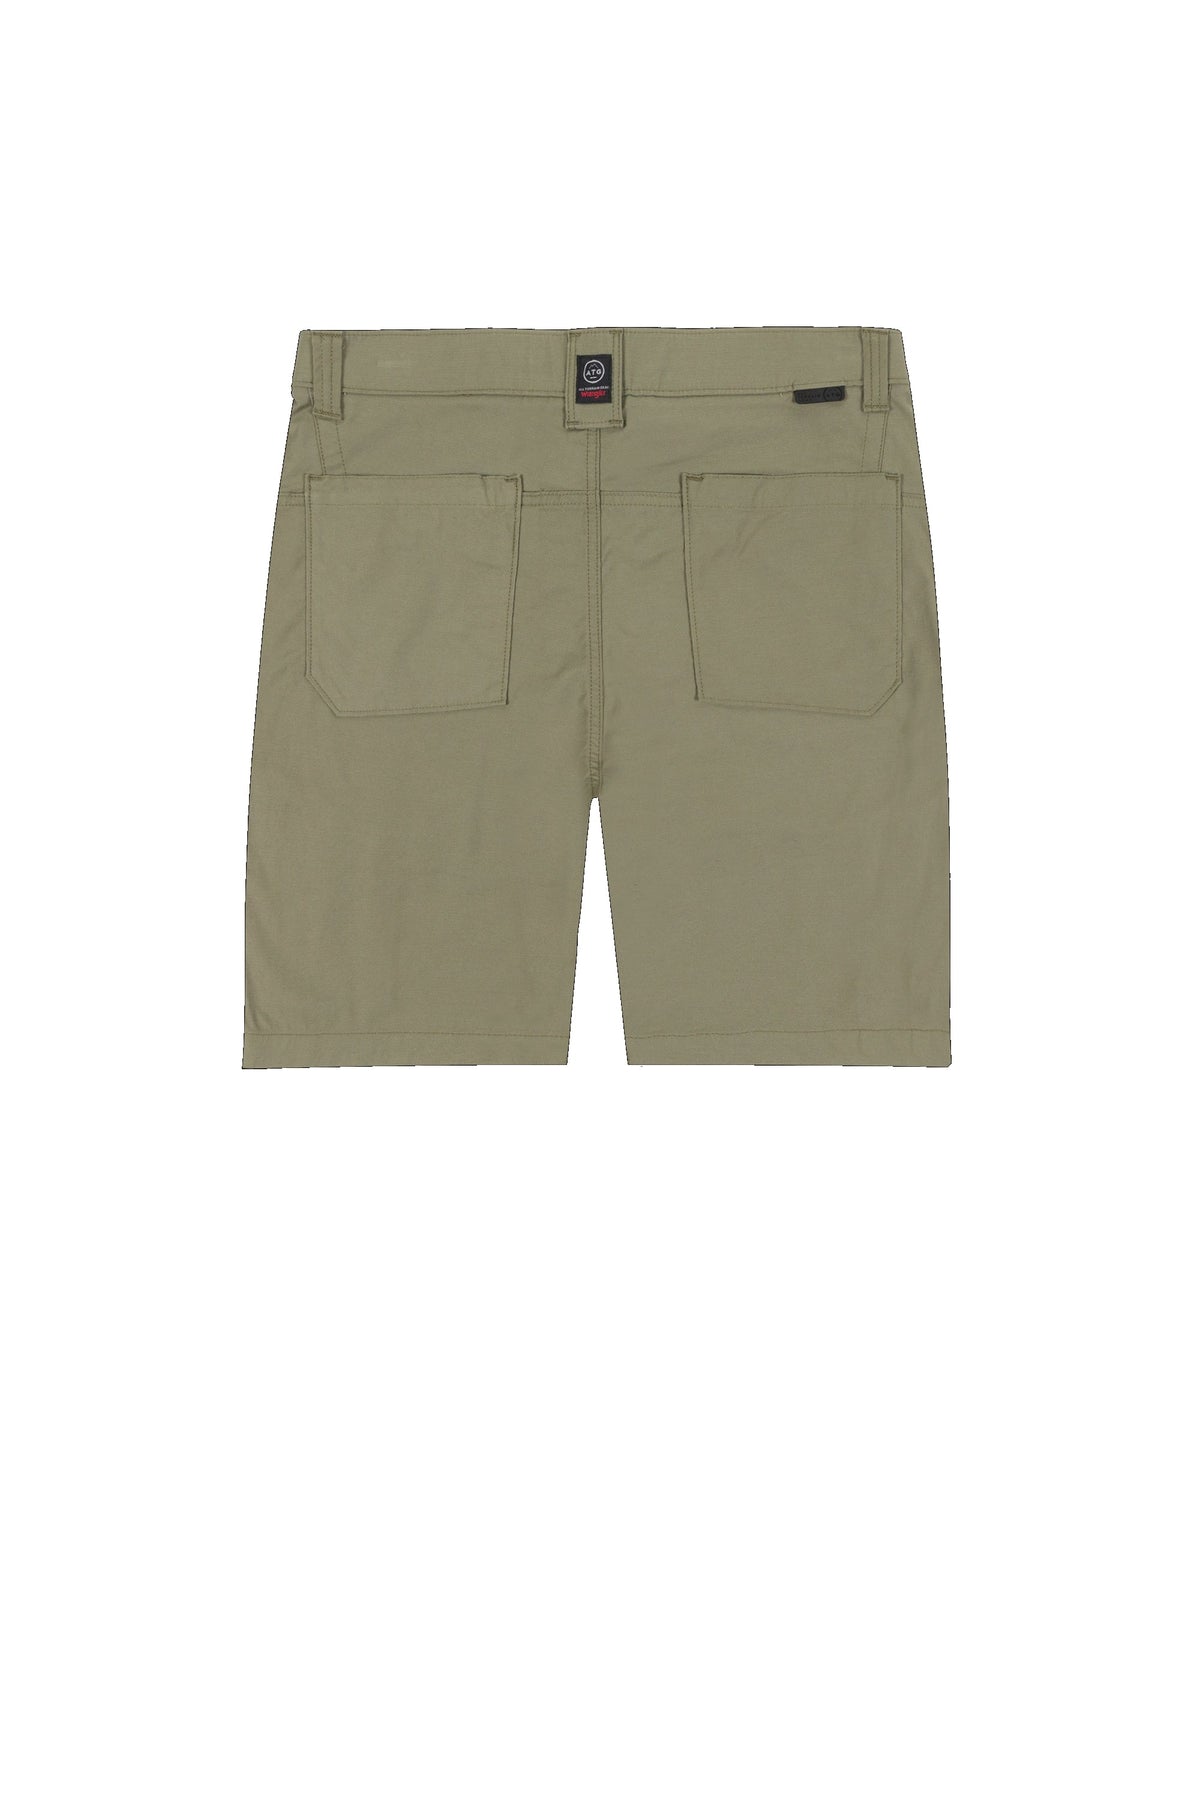 Rugged Trail Short in Dusty Olive